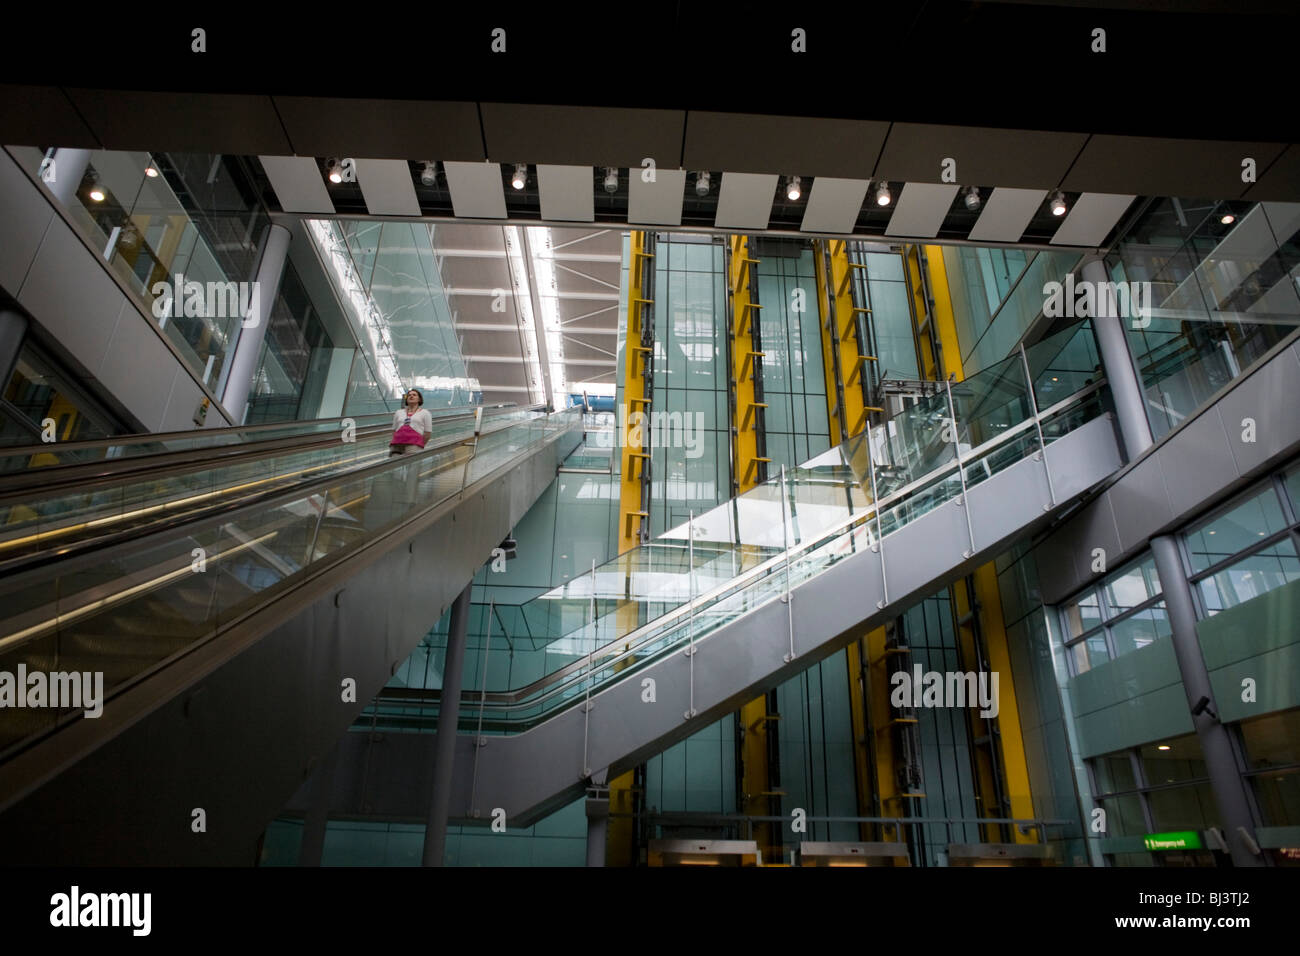 Lone departing female passenger descends one of the 105 escalators in Terminal 5 of London's Heathrow Airport. Stock Photo